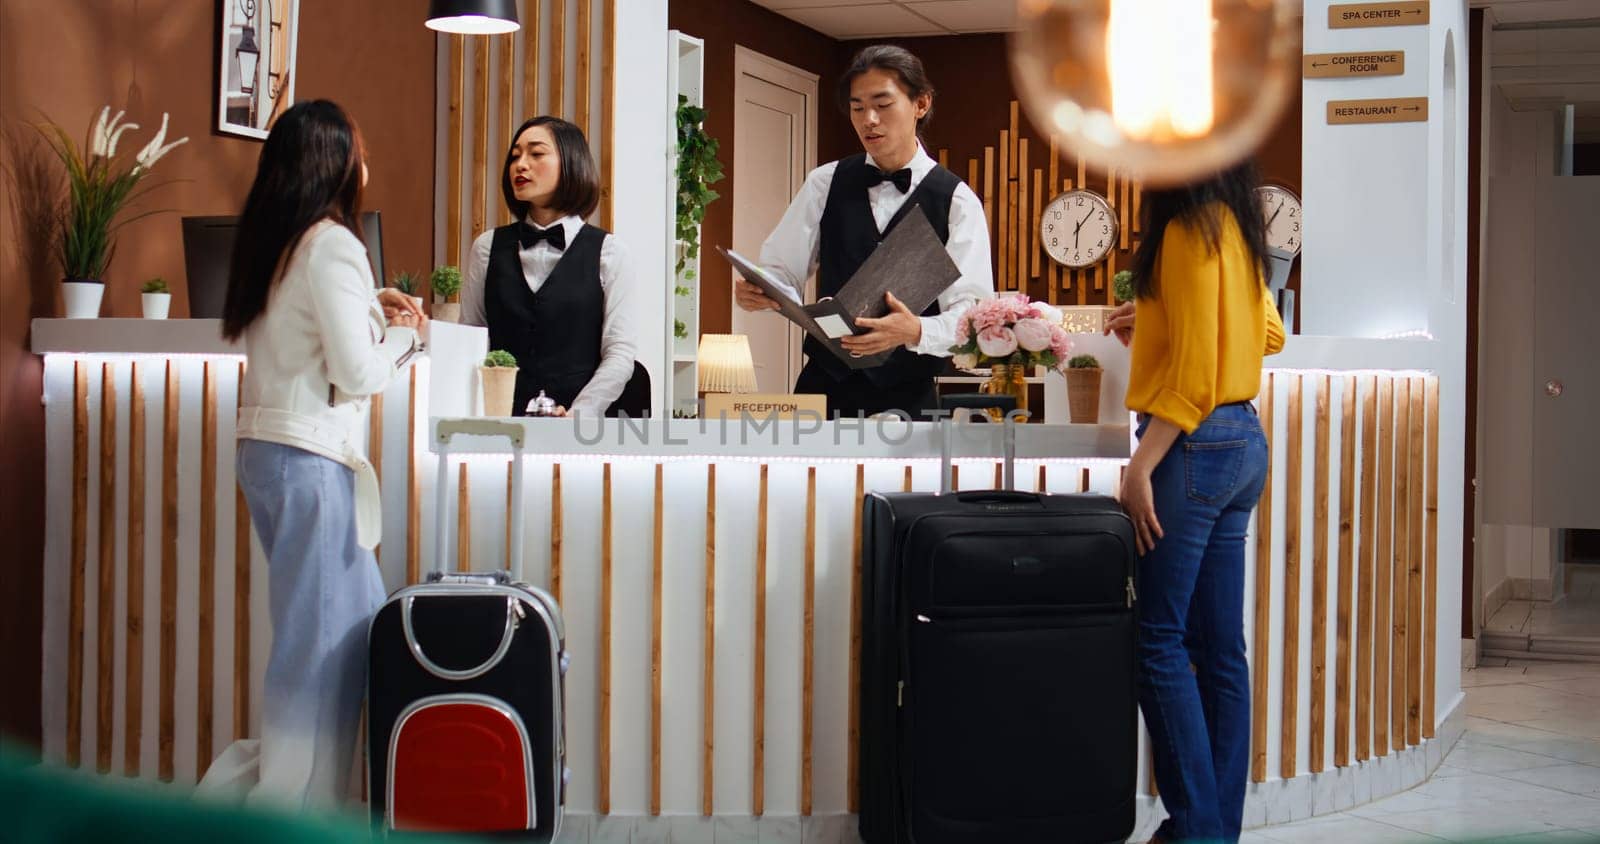 Hotel employees greeting customers at front desk in lobby by DCStudio